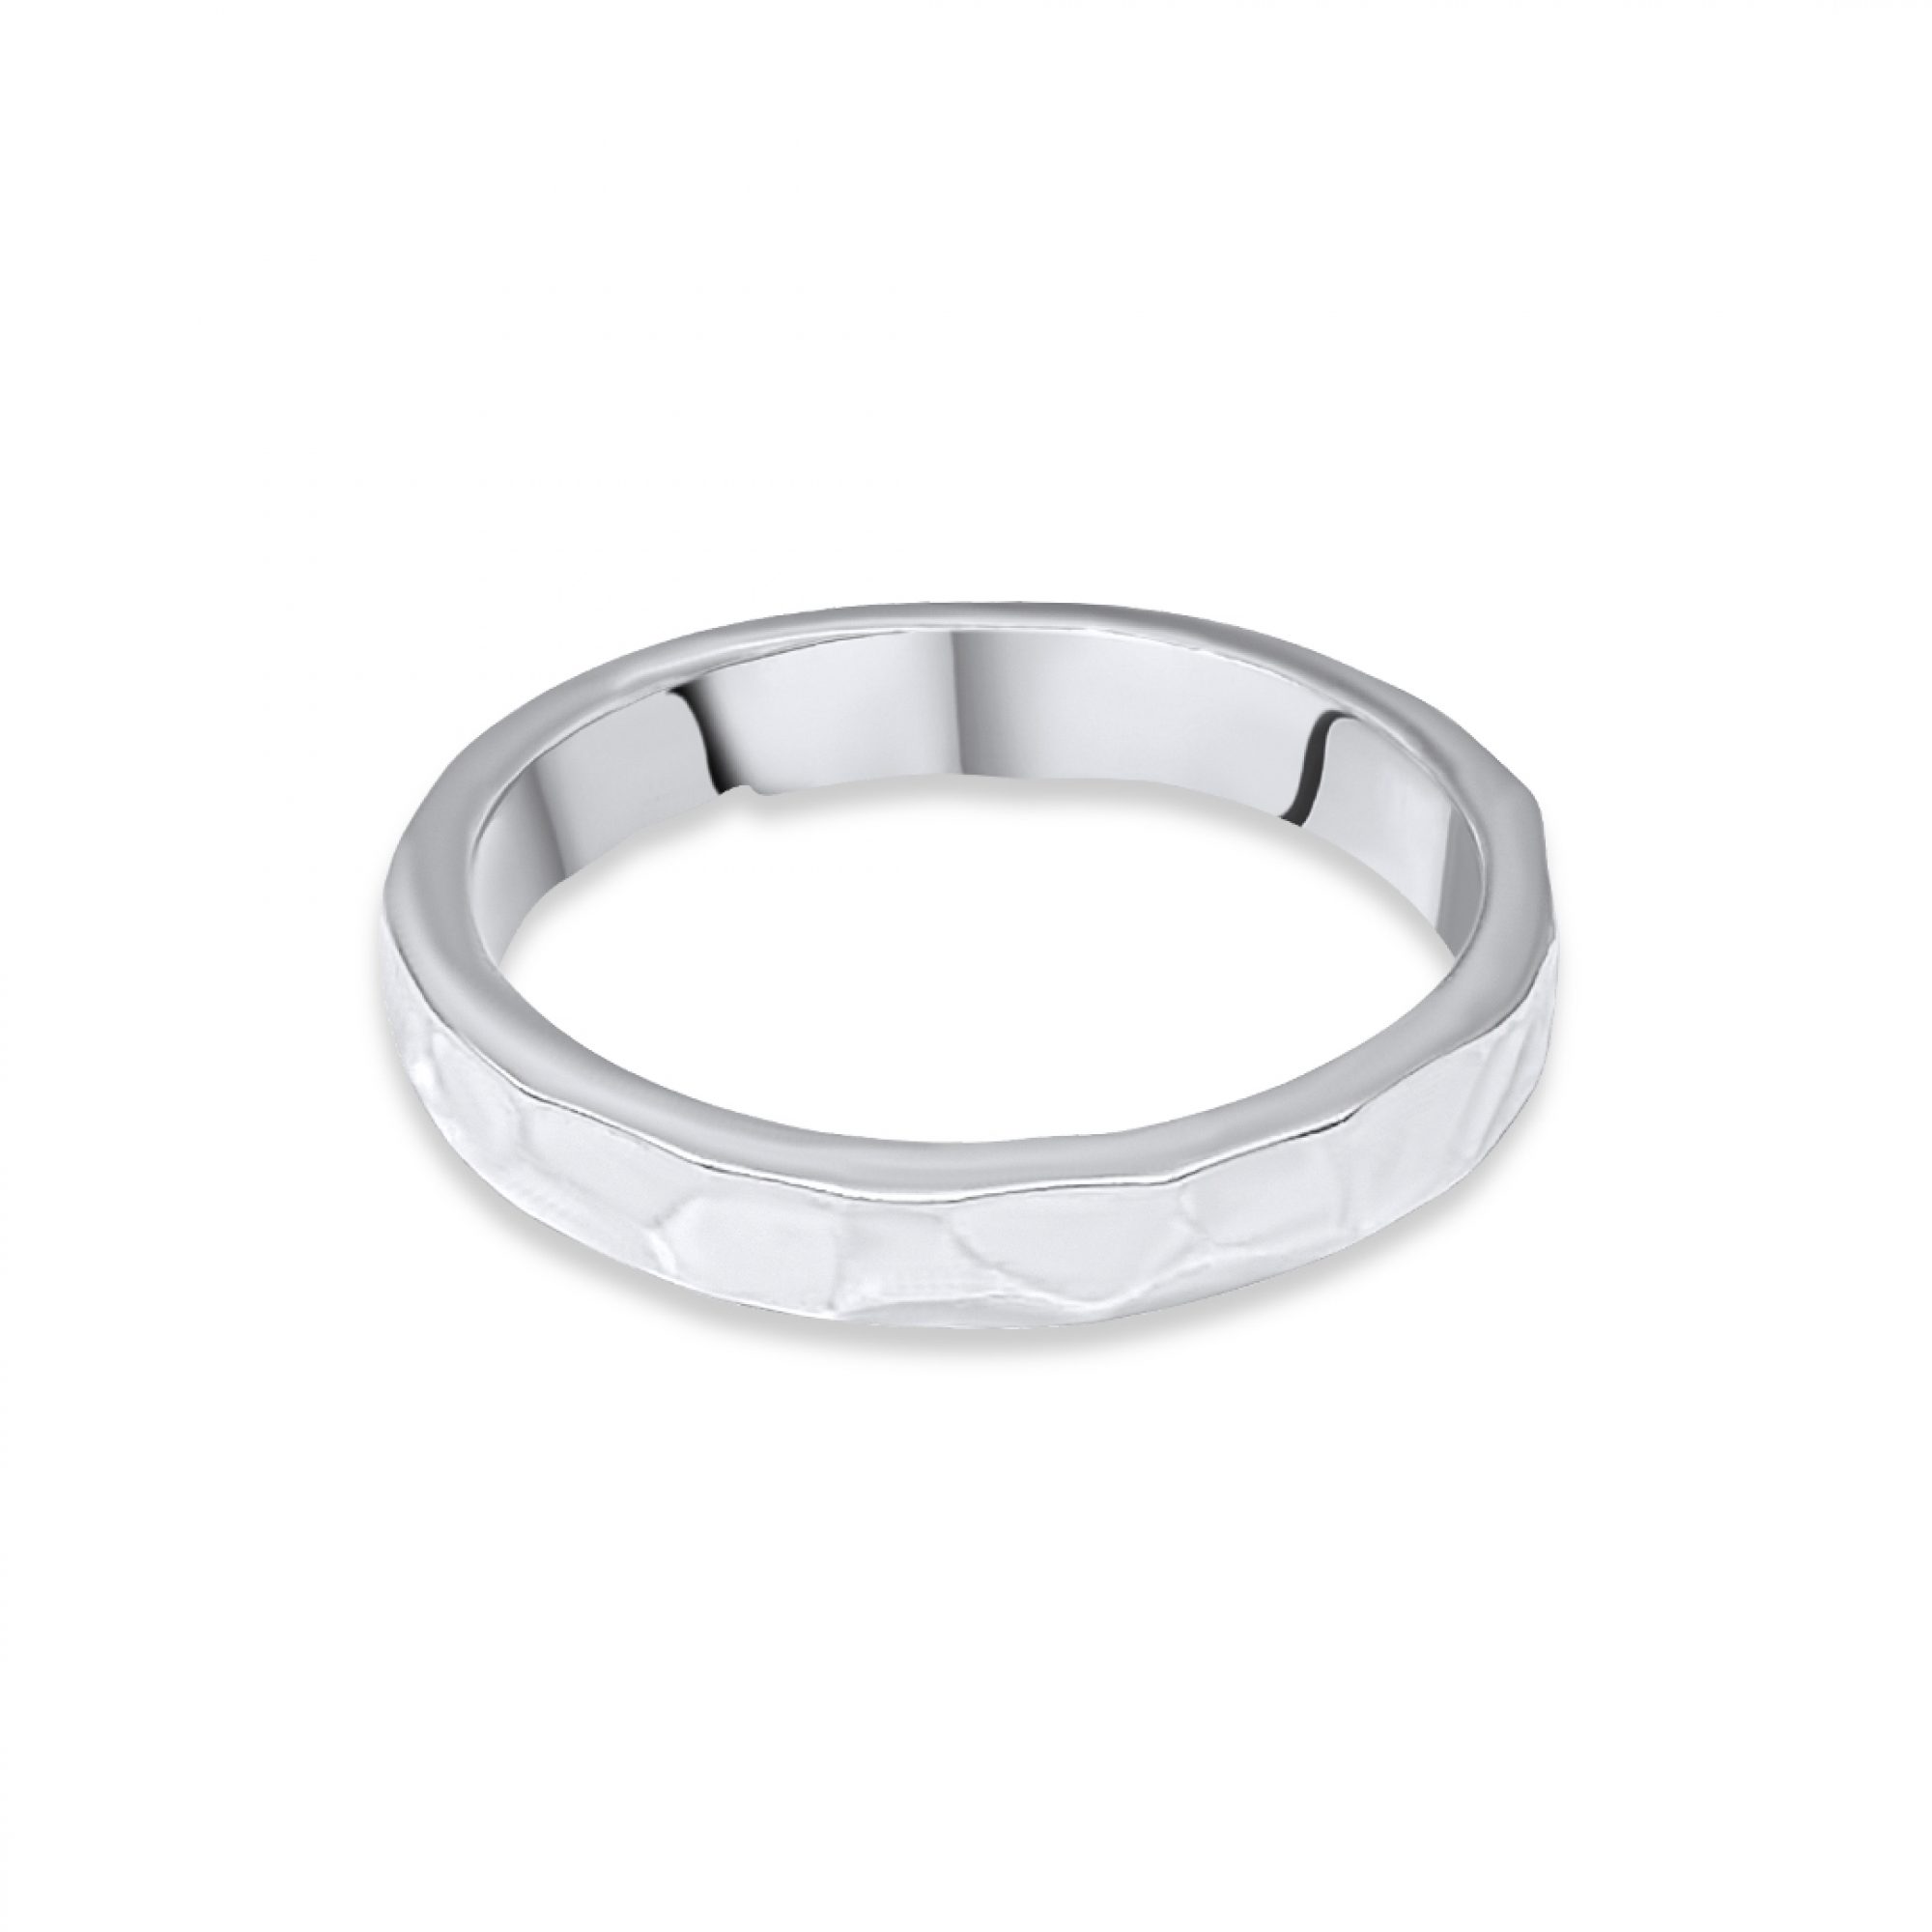 Silver band ring 3mm